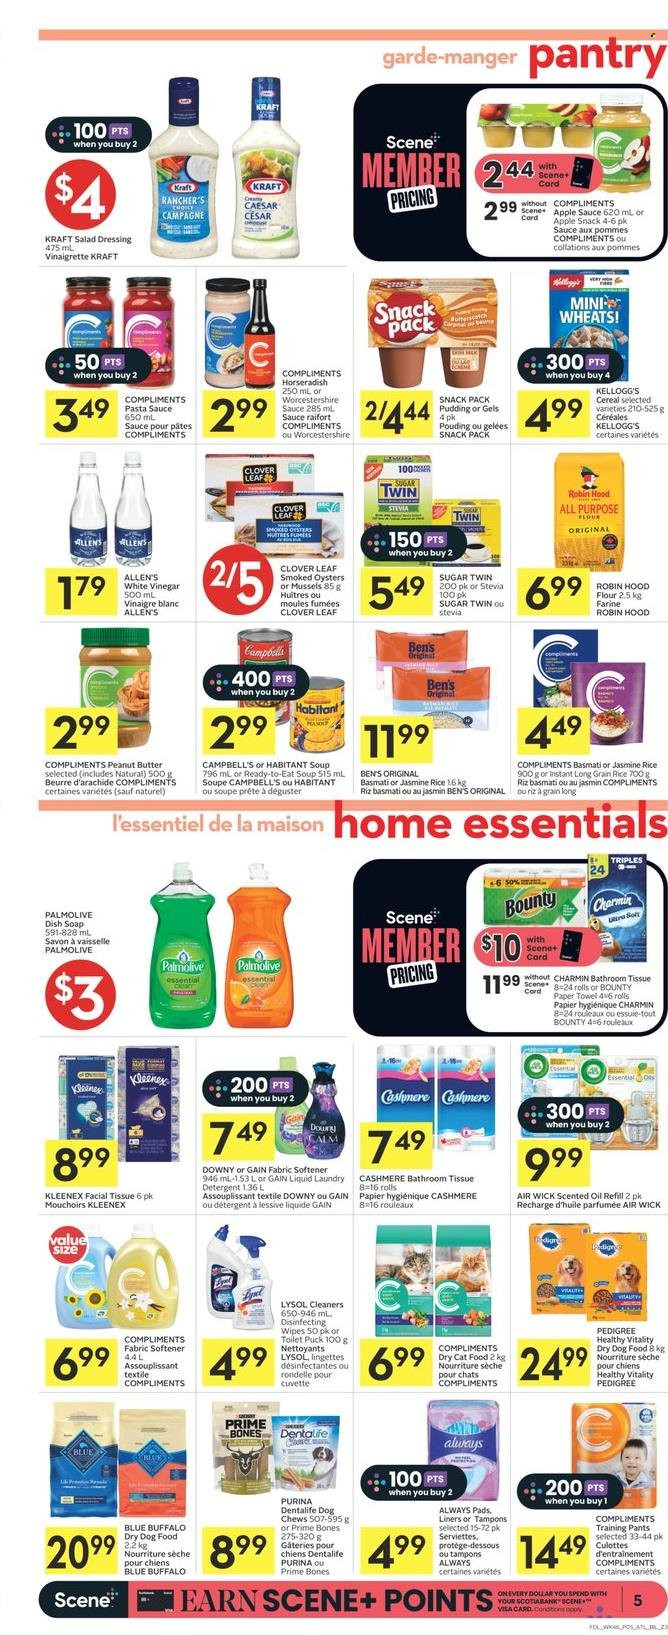 thumbnail - Co-op Flyer - March 16, 2023 - March 22, 2023 - Sales products - horseradish, mussels, smoked oysters, oysters, Campbell's, pasta sauce, soup, sauce, Kraft®, Puck, pudding, Clover, Bounty, Kellogg's, all purpose flour, flour, sugar, stevia, cereals, basmati rice, rice, jasmine rice, long grain rice, salad dressing, vinaigrette dressing, worcestershire sauce, dressing, vinegar, apple sauce, peanut butter, L&P, wipes, pants, baby pants, bath tissue, Kleenex, paper towels, Charmin, Gain, Lysol, fabric softener, laundry detergent, Palmolive, soap, Always pads, tampons, animal food, dry dog food, animal treats, Blue Buffalo, cat food, dog food, Purina, Pedigree, Dentalife, dog chews, dry cat food, detergent. Page 5.